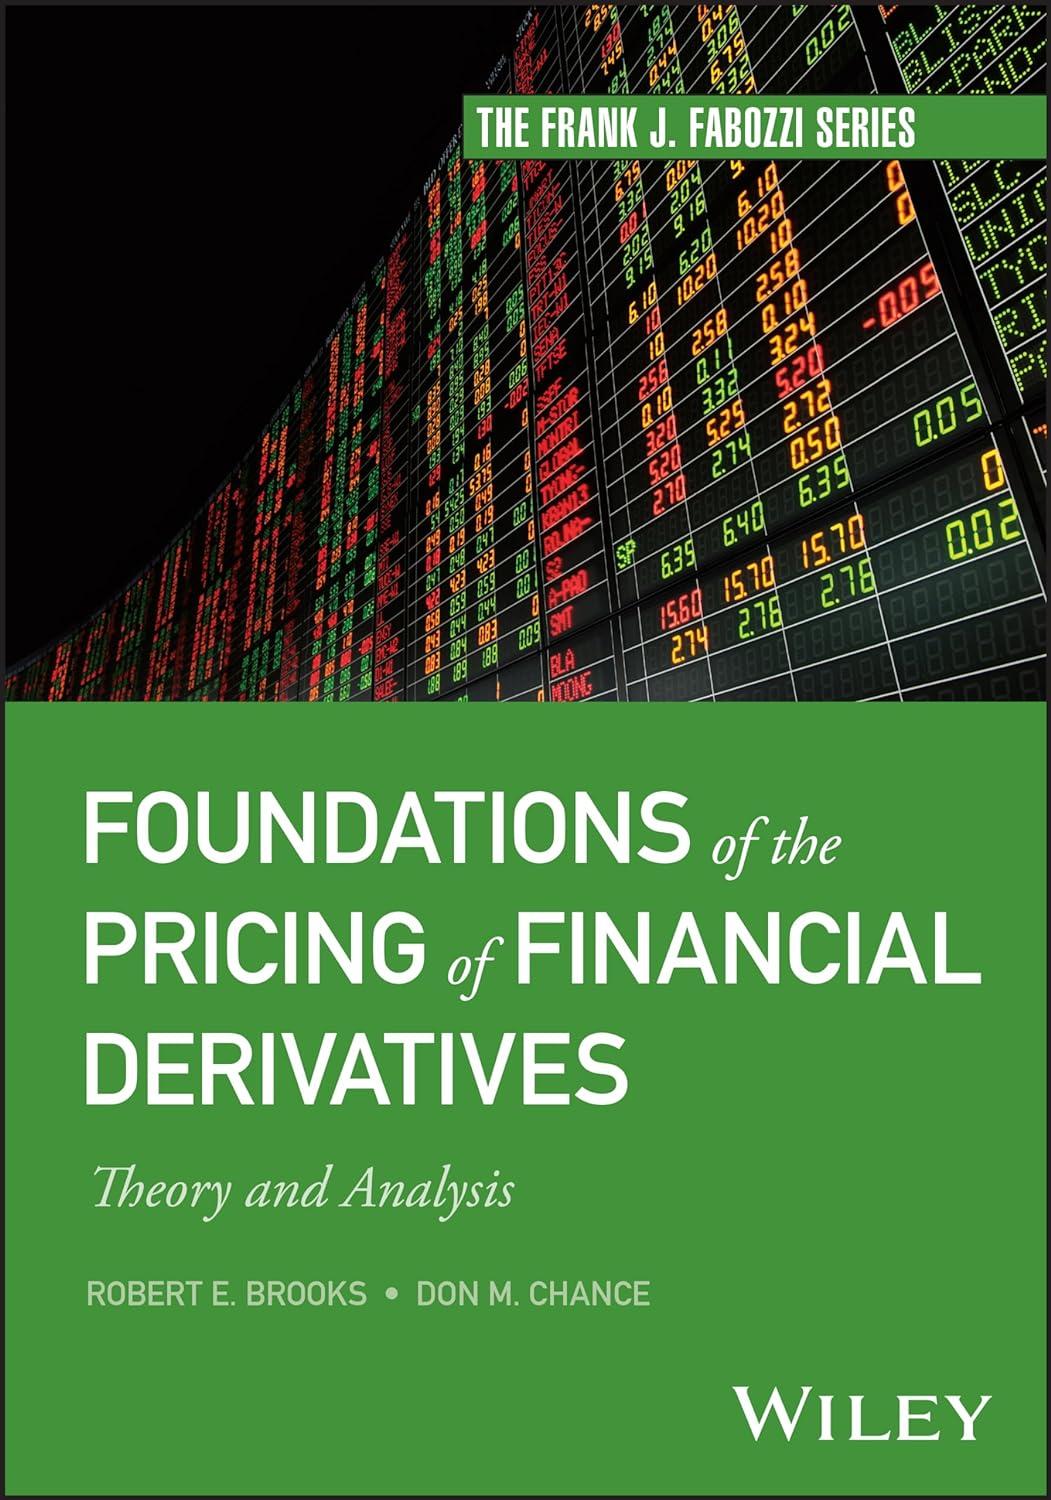 foundations of the pricing of financial derivatives theory and analysis 1st edition robert e. brooks, don m.